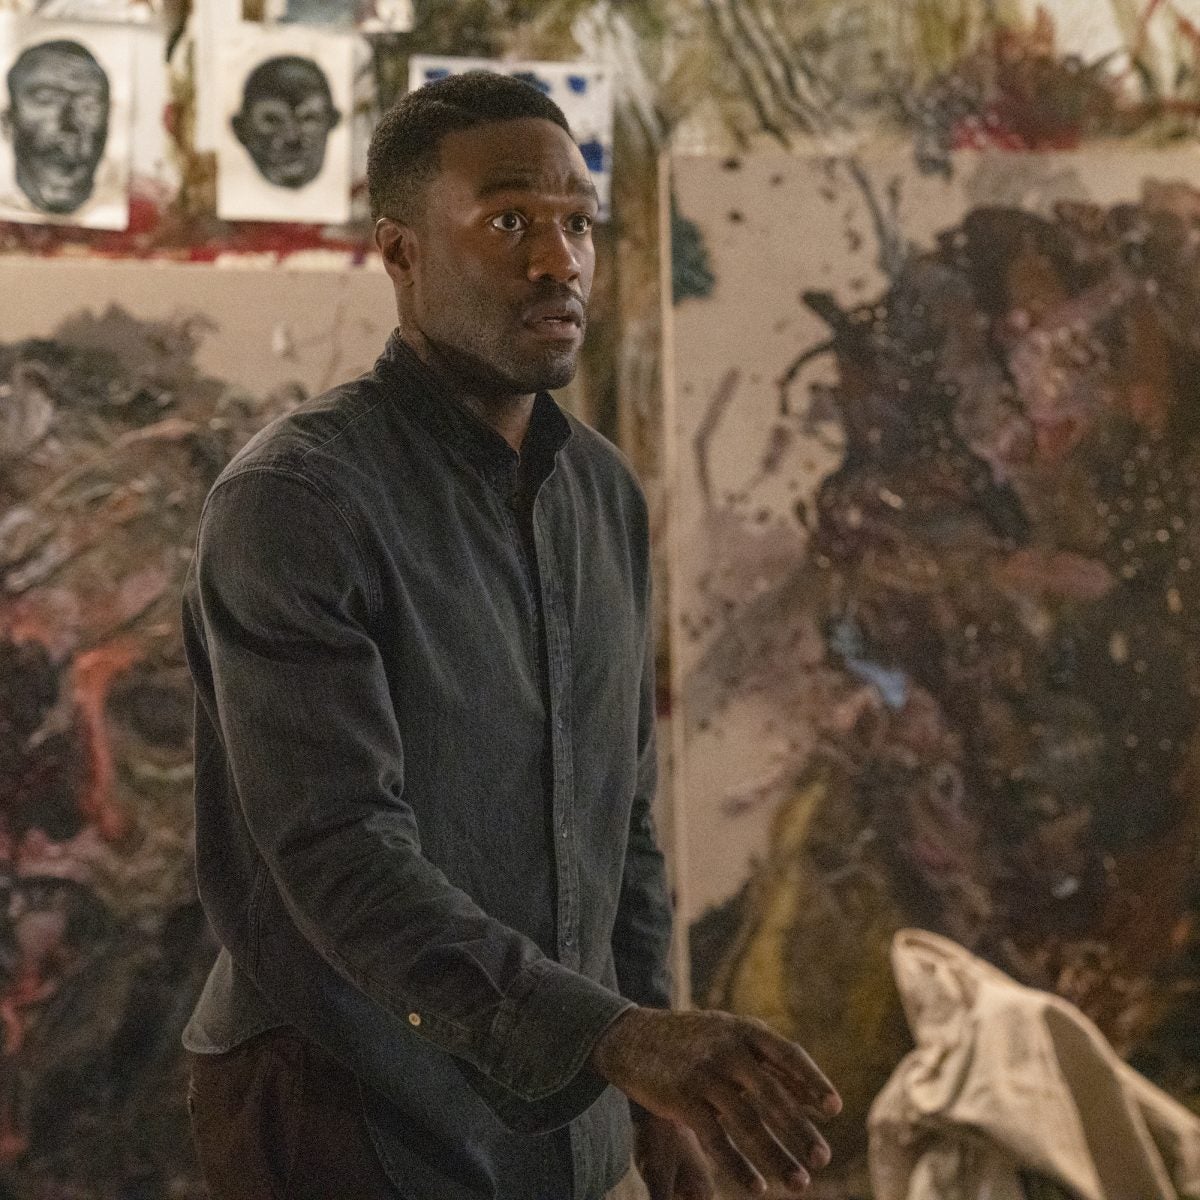 Attention Horror Fans: The New 'Candyman' Is Coming From A Black Woman